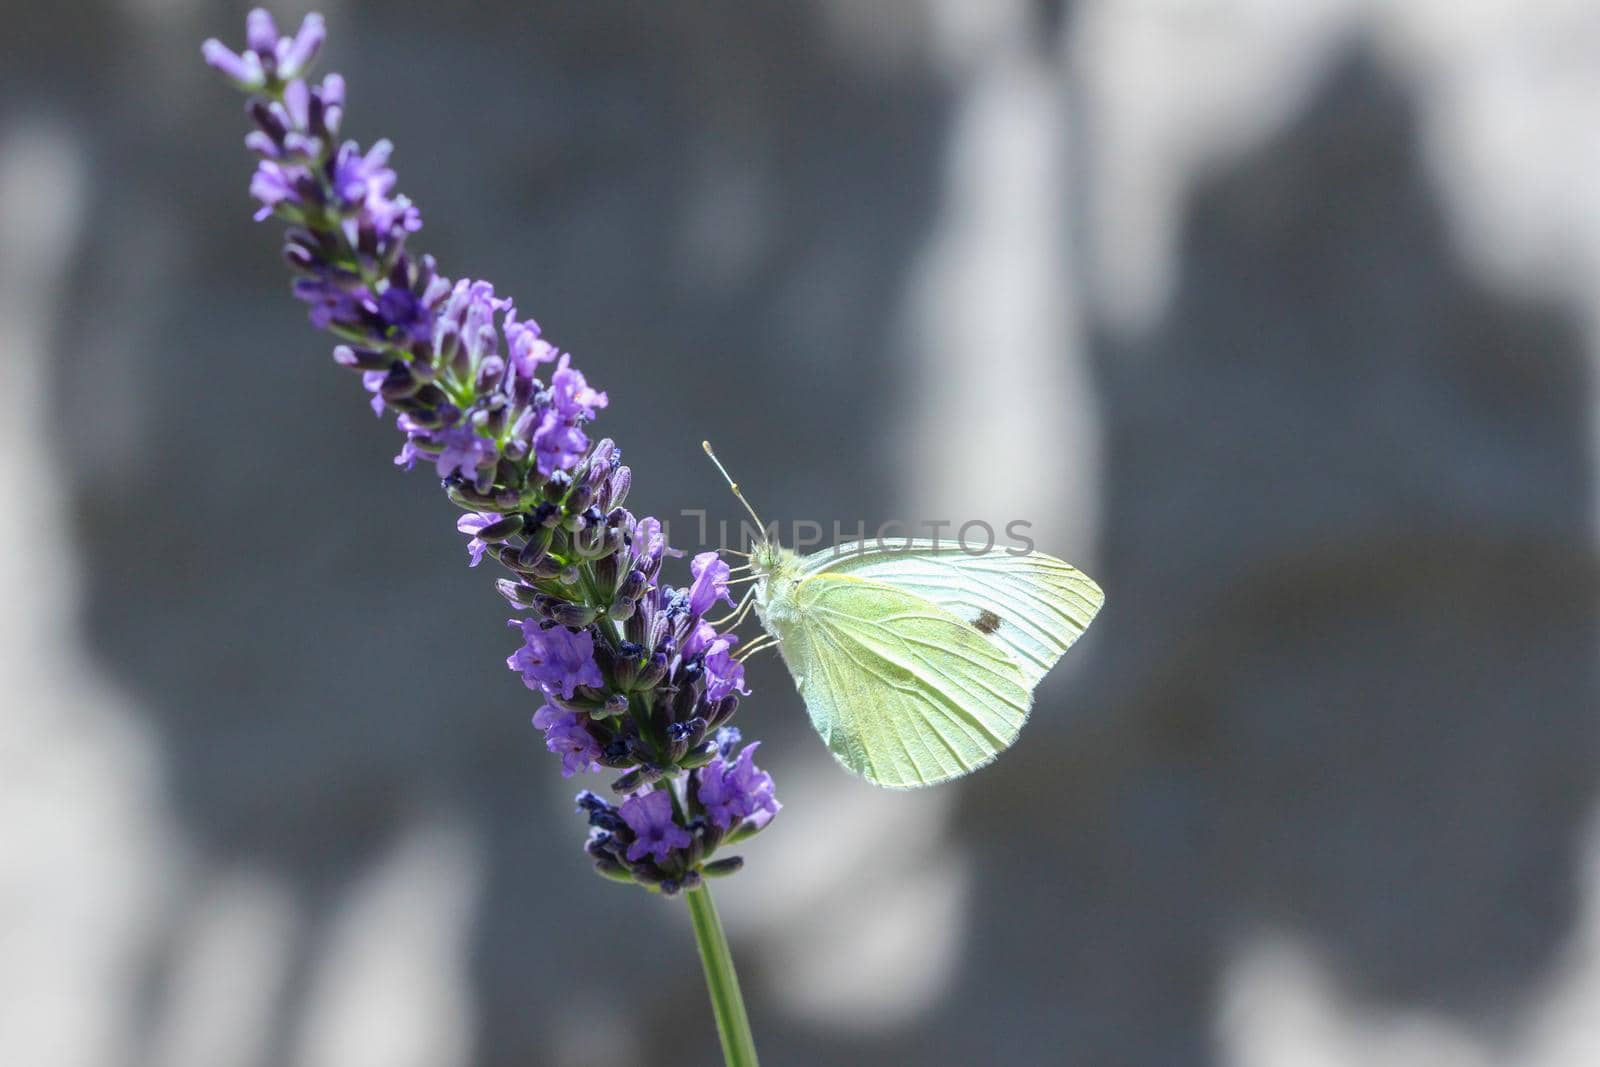 Cabbage white butterfly (Pieris rapae) on a lavender flowered